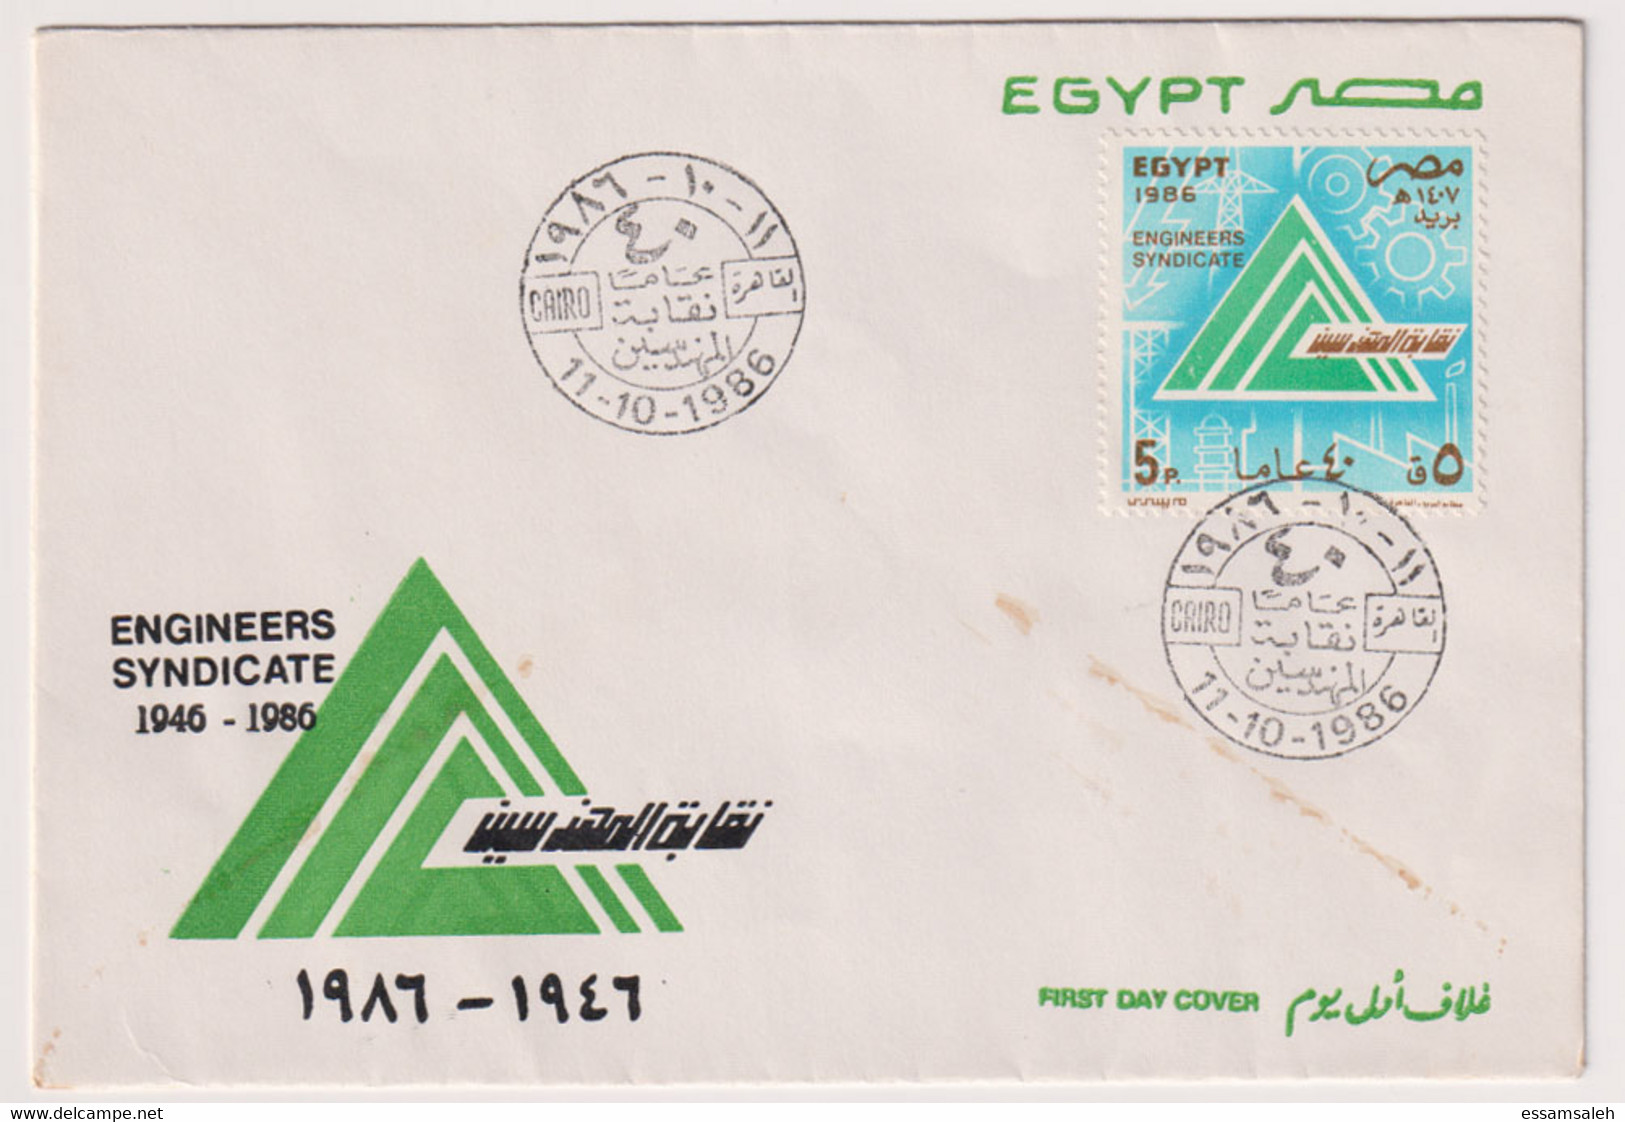 EGS30584 Egypt 1986 Illustrated FDC Engineers Syndicate - Covers & Documents